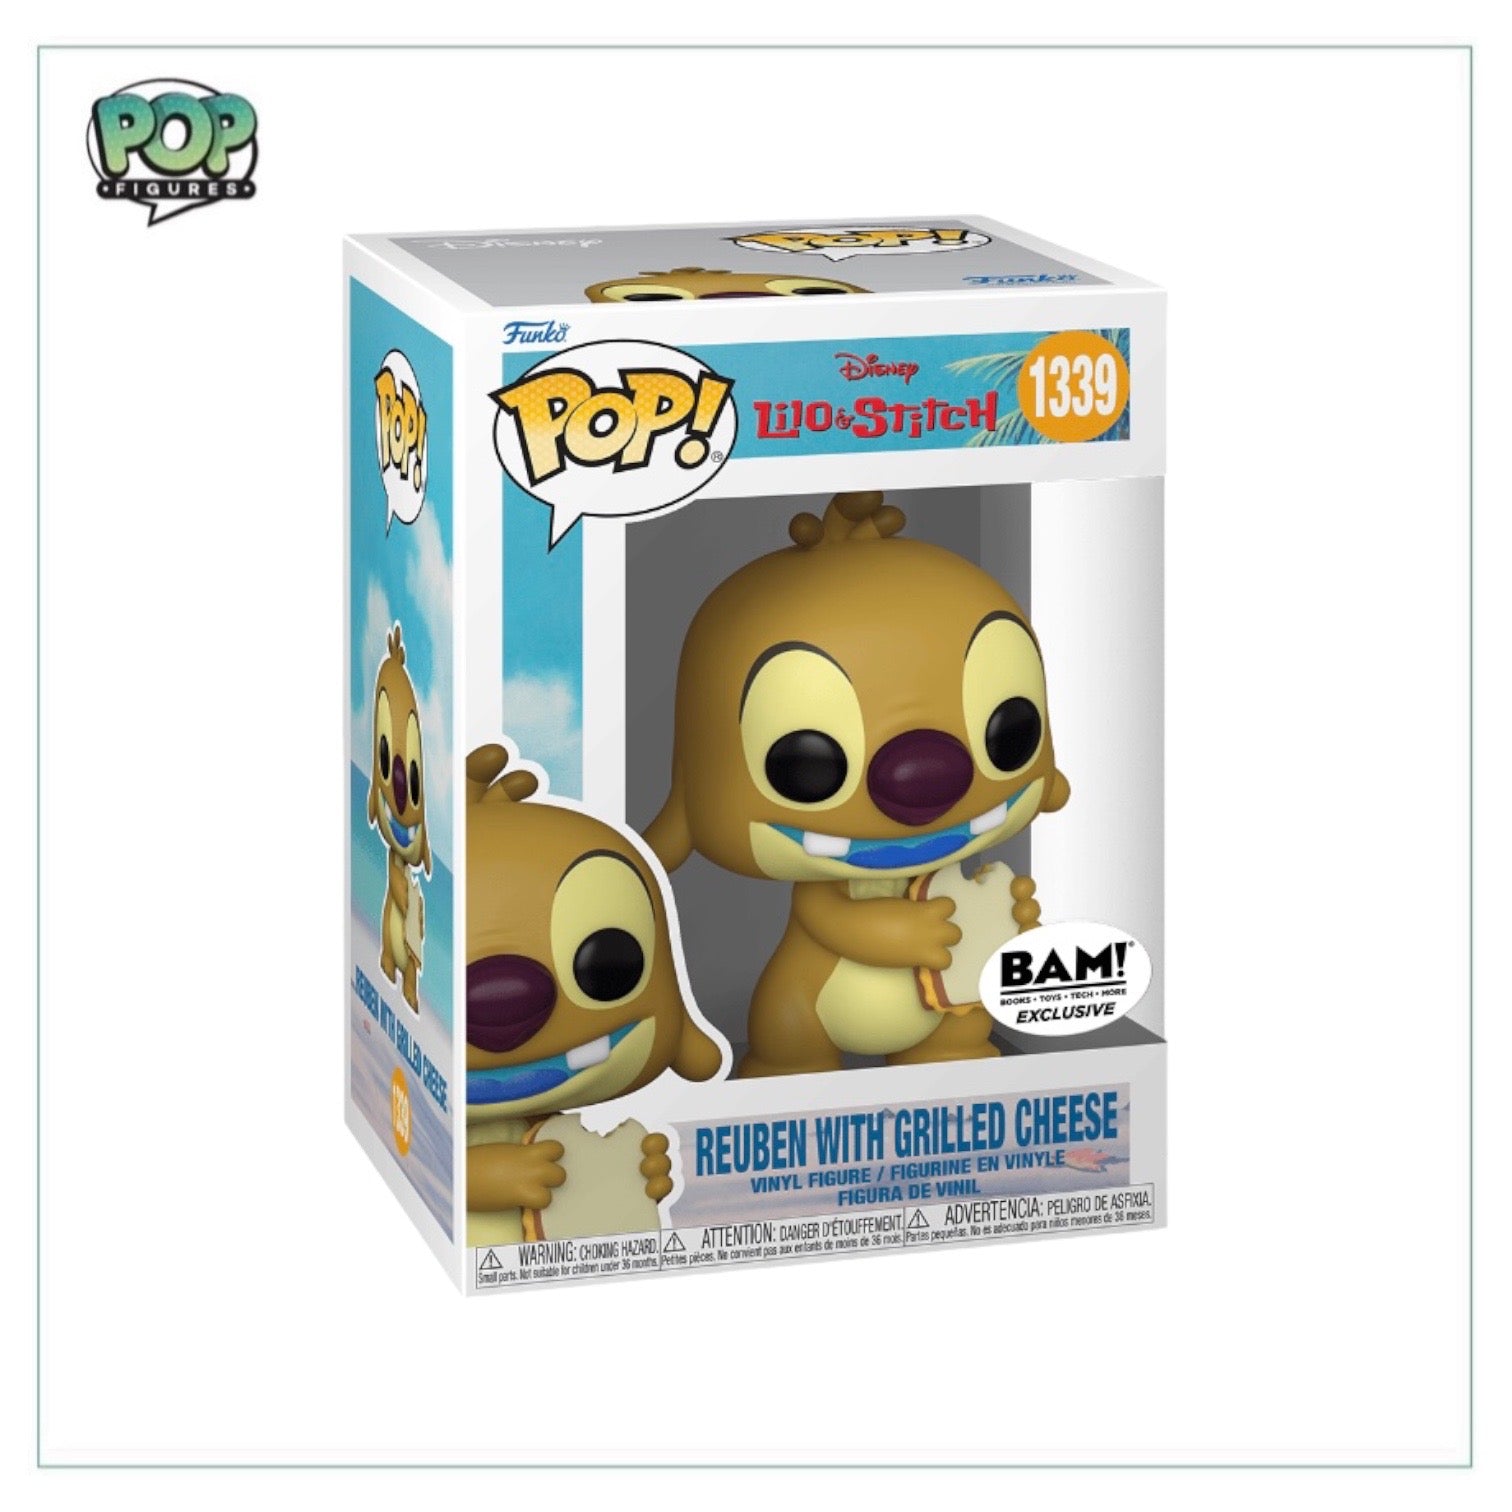 Reuben with Grilled Cheese #1339 Funko Pop! - Lilo & Stitch - BAM Exclusive